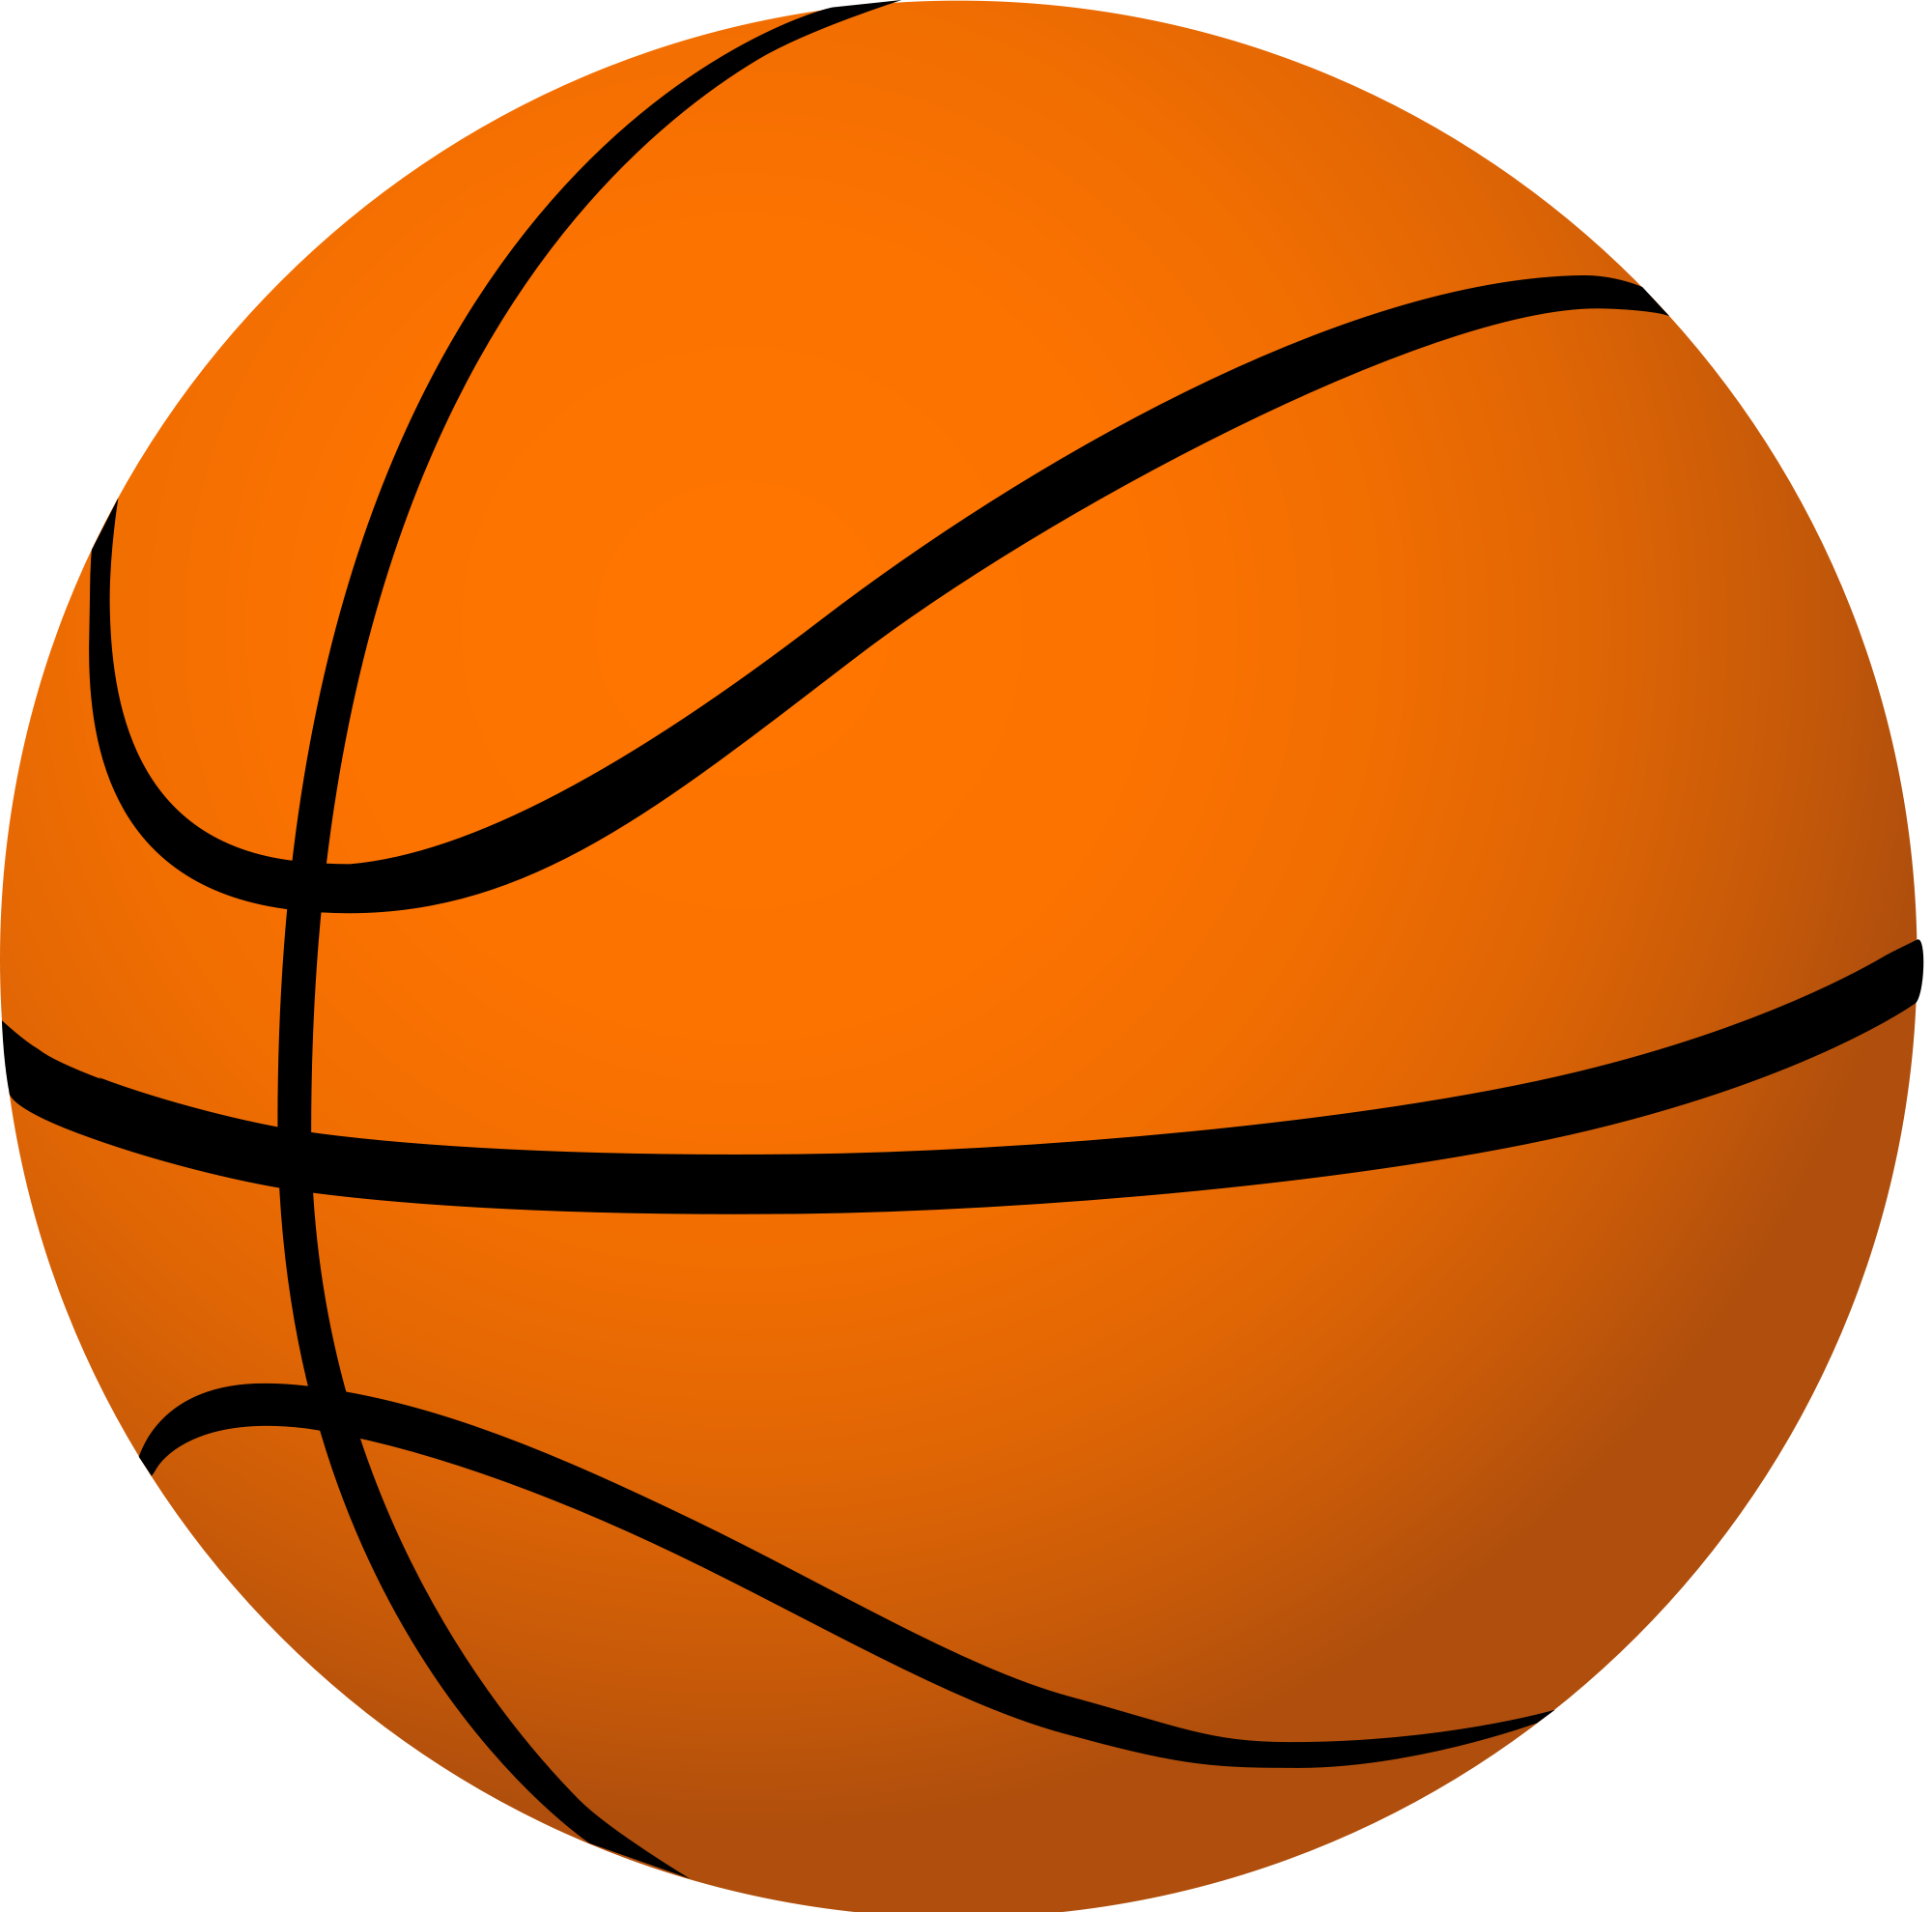 Basketball clipart no background free images